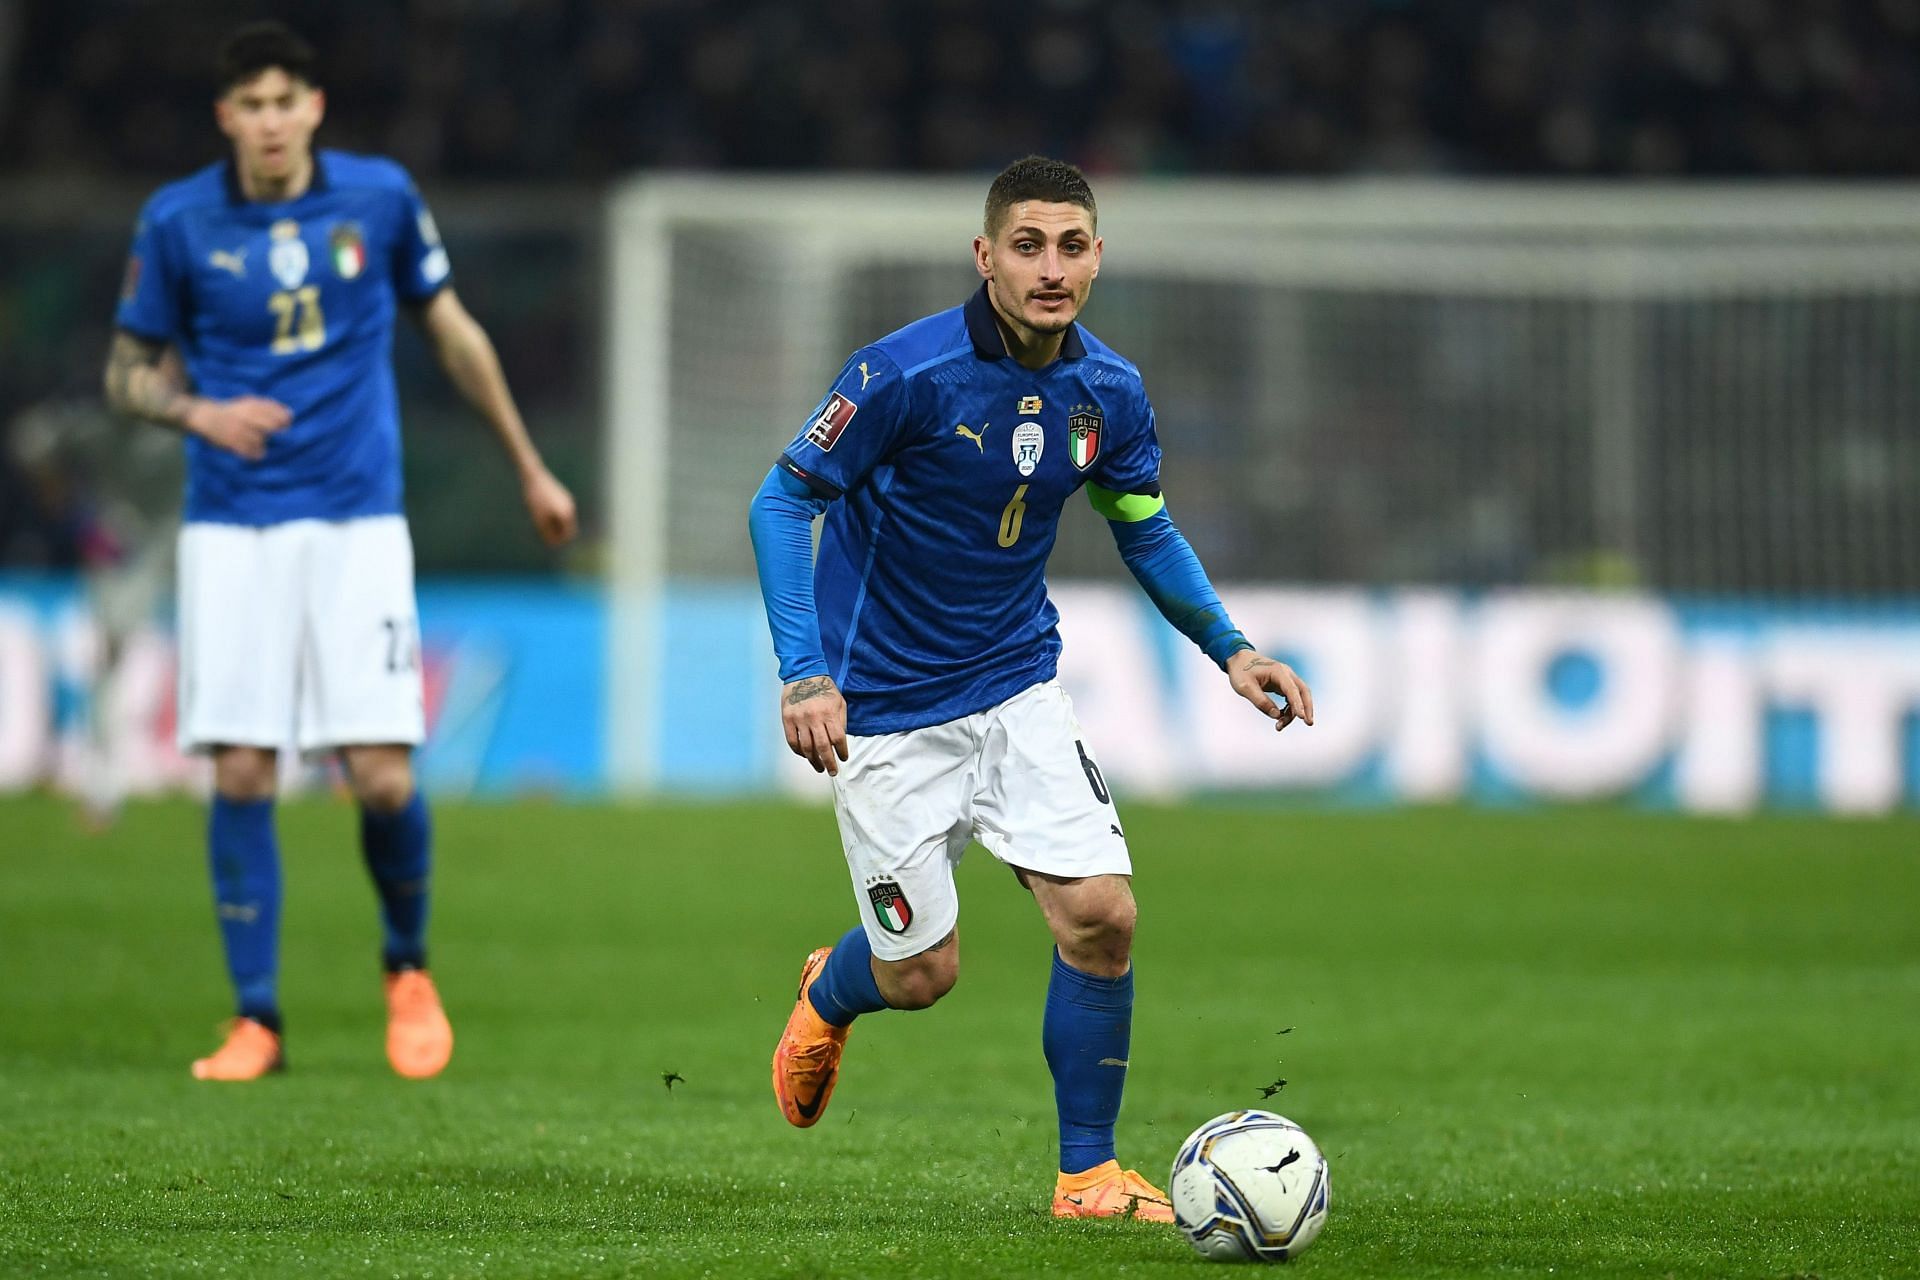 Mauro Verratti is likely to extend his stay at the Parc des Princes.